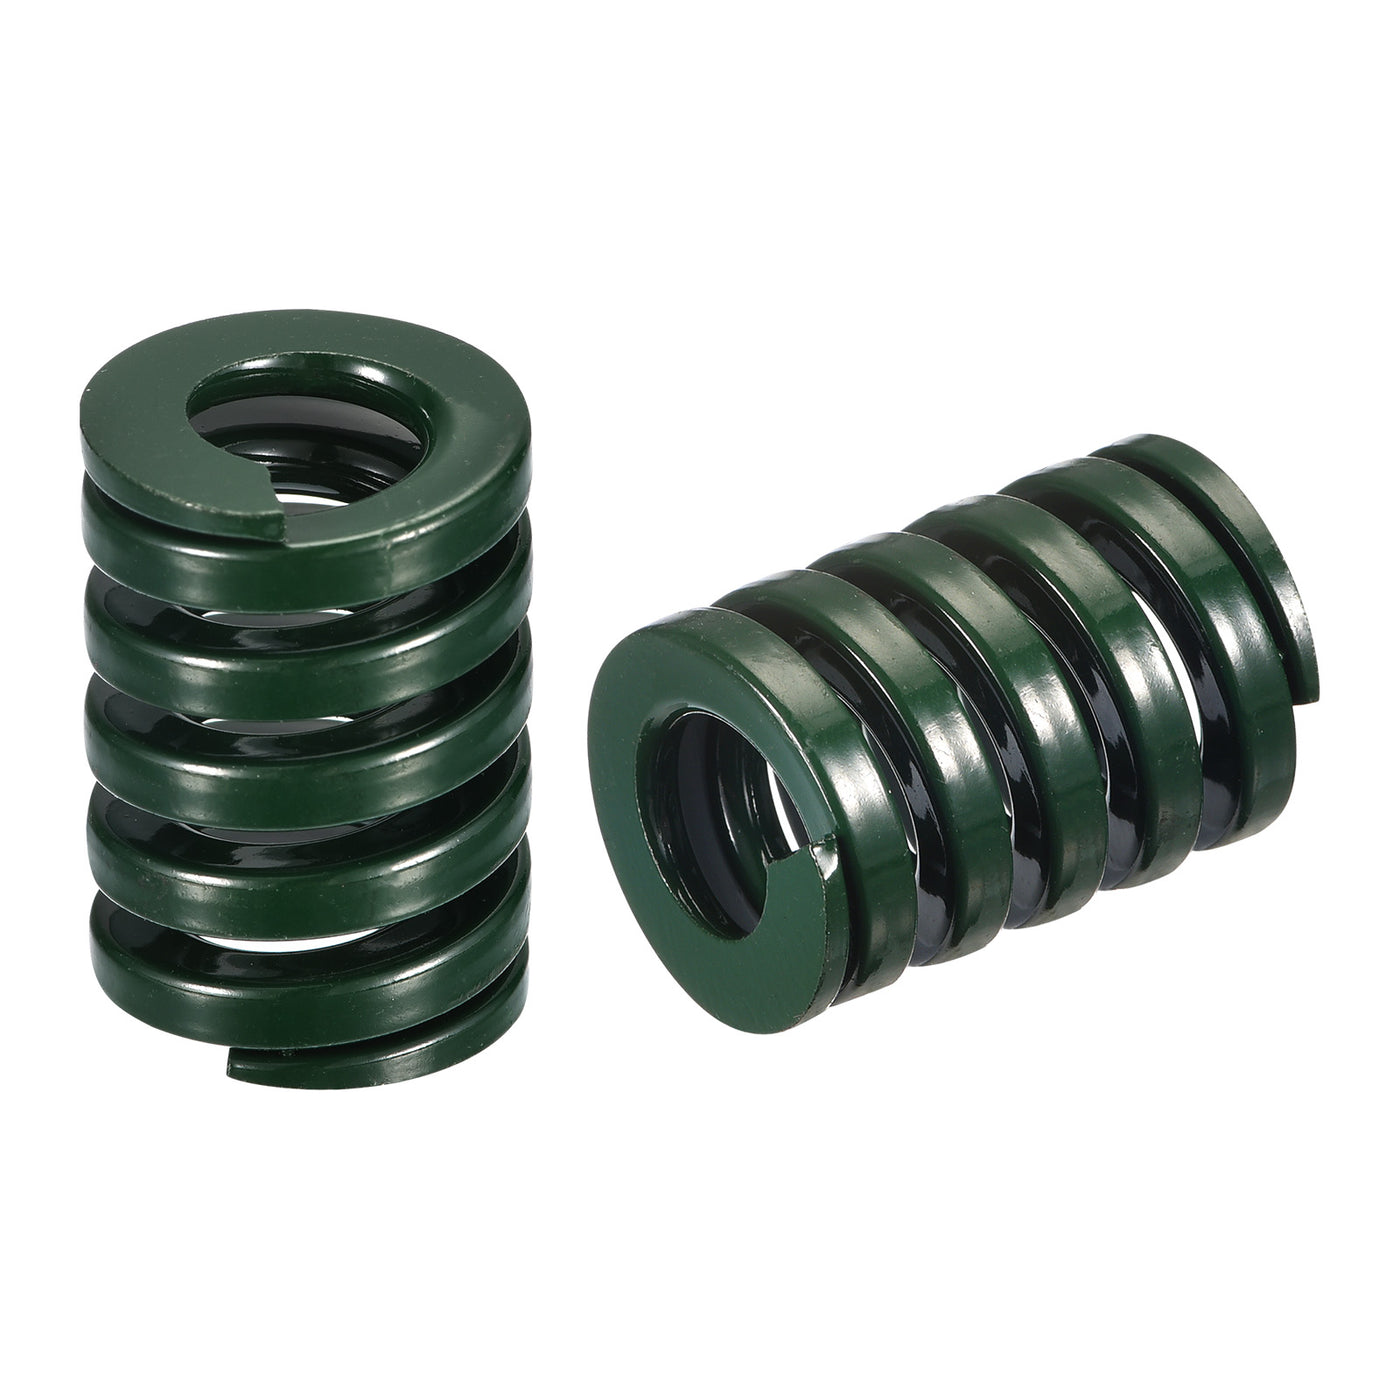 uxcell Uxcell 3D Printer Die Spring, 2pcs 22mm OD 30mm Long Spiral Stamping Compression Green